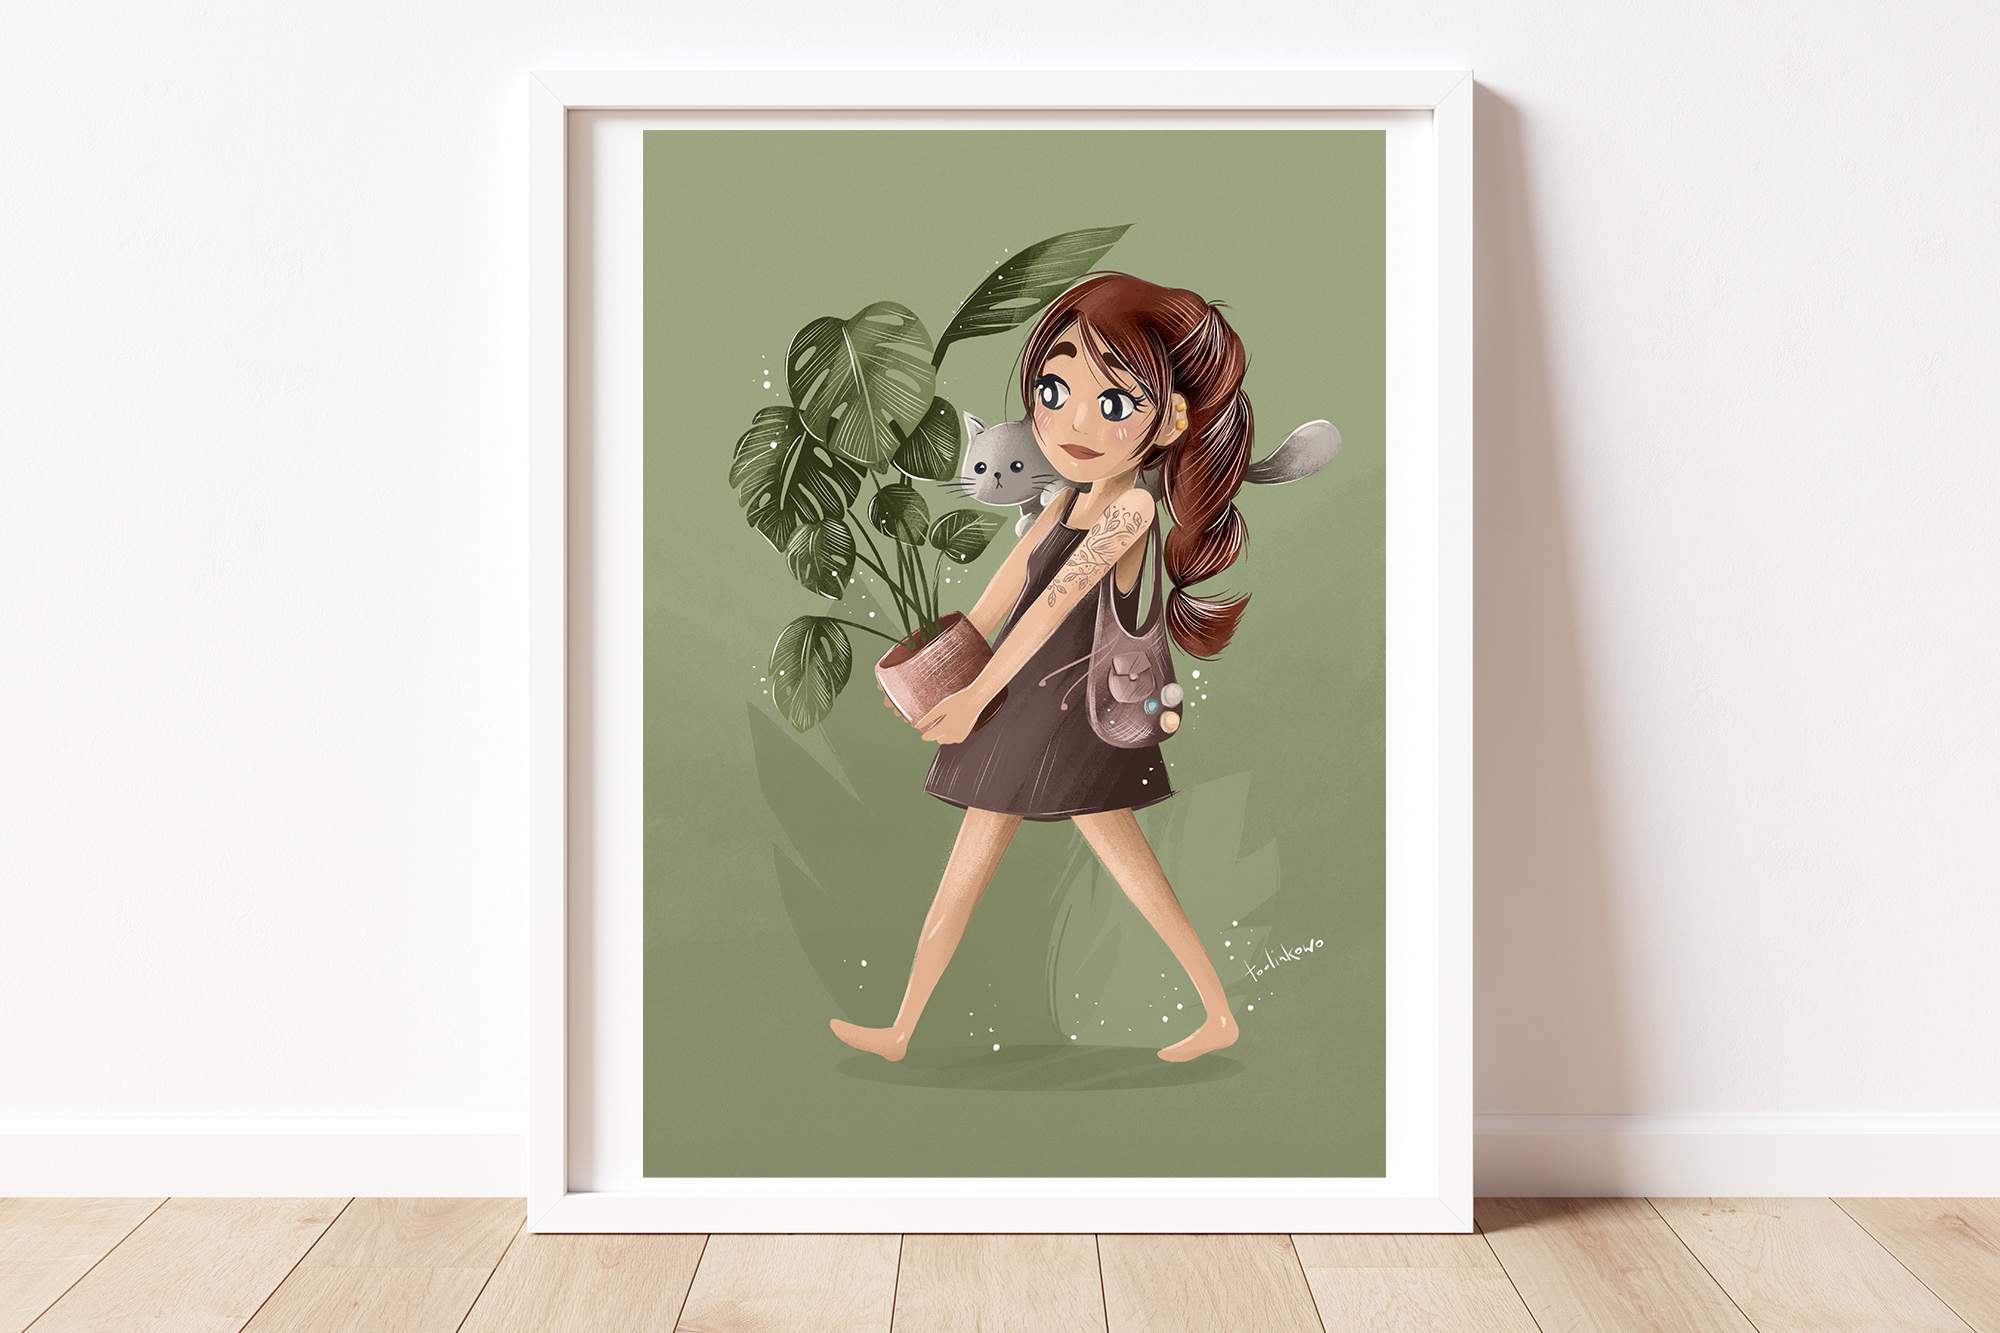 Plant Lady Poster